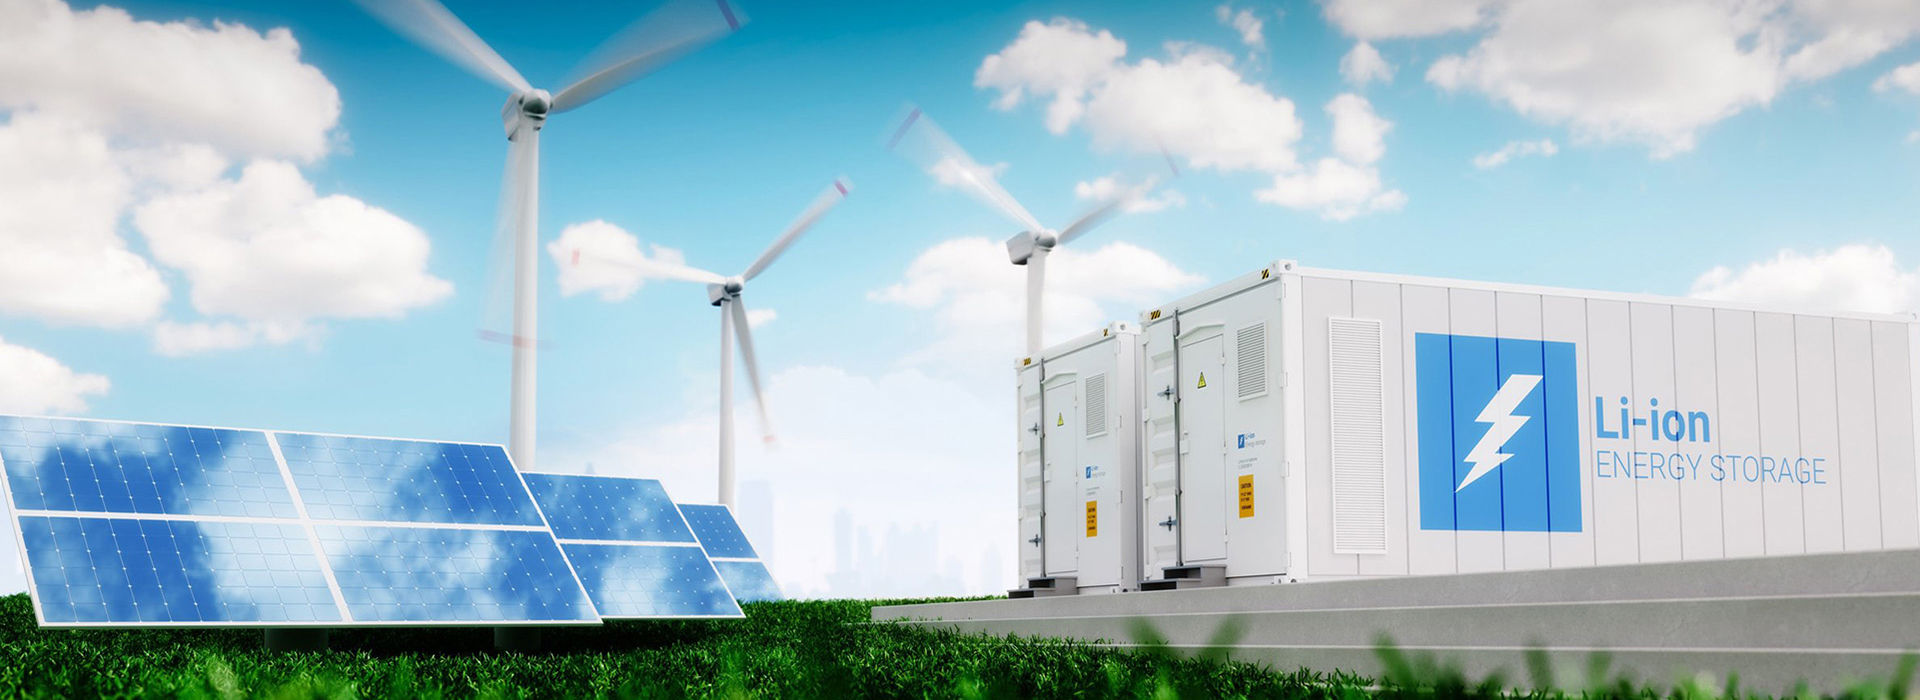 High capacity energy storage for globe's climate